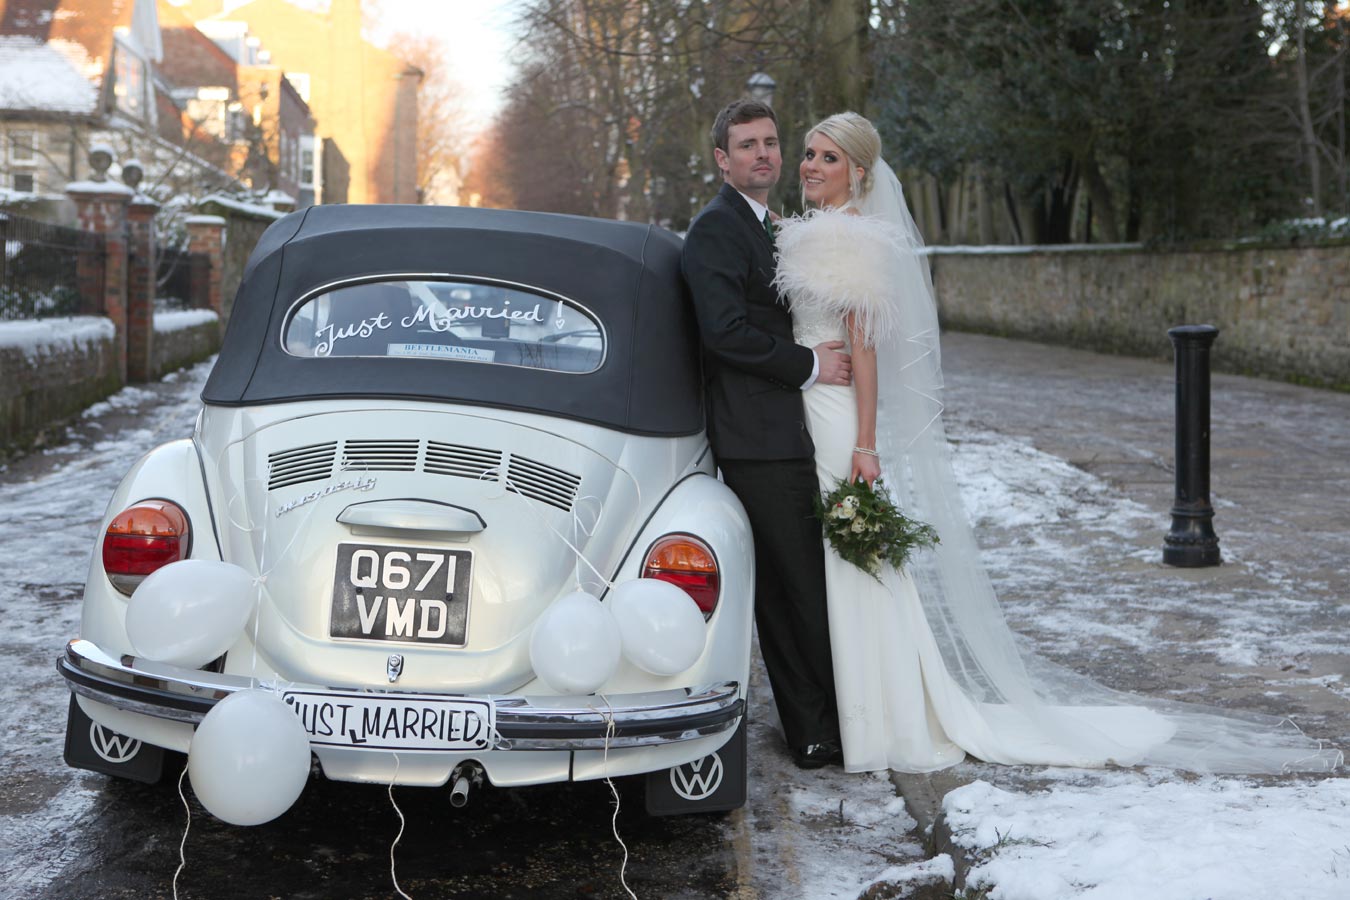 2 – couple by the beetle